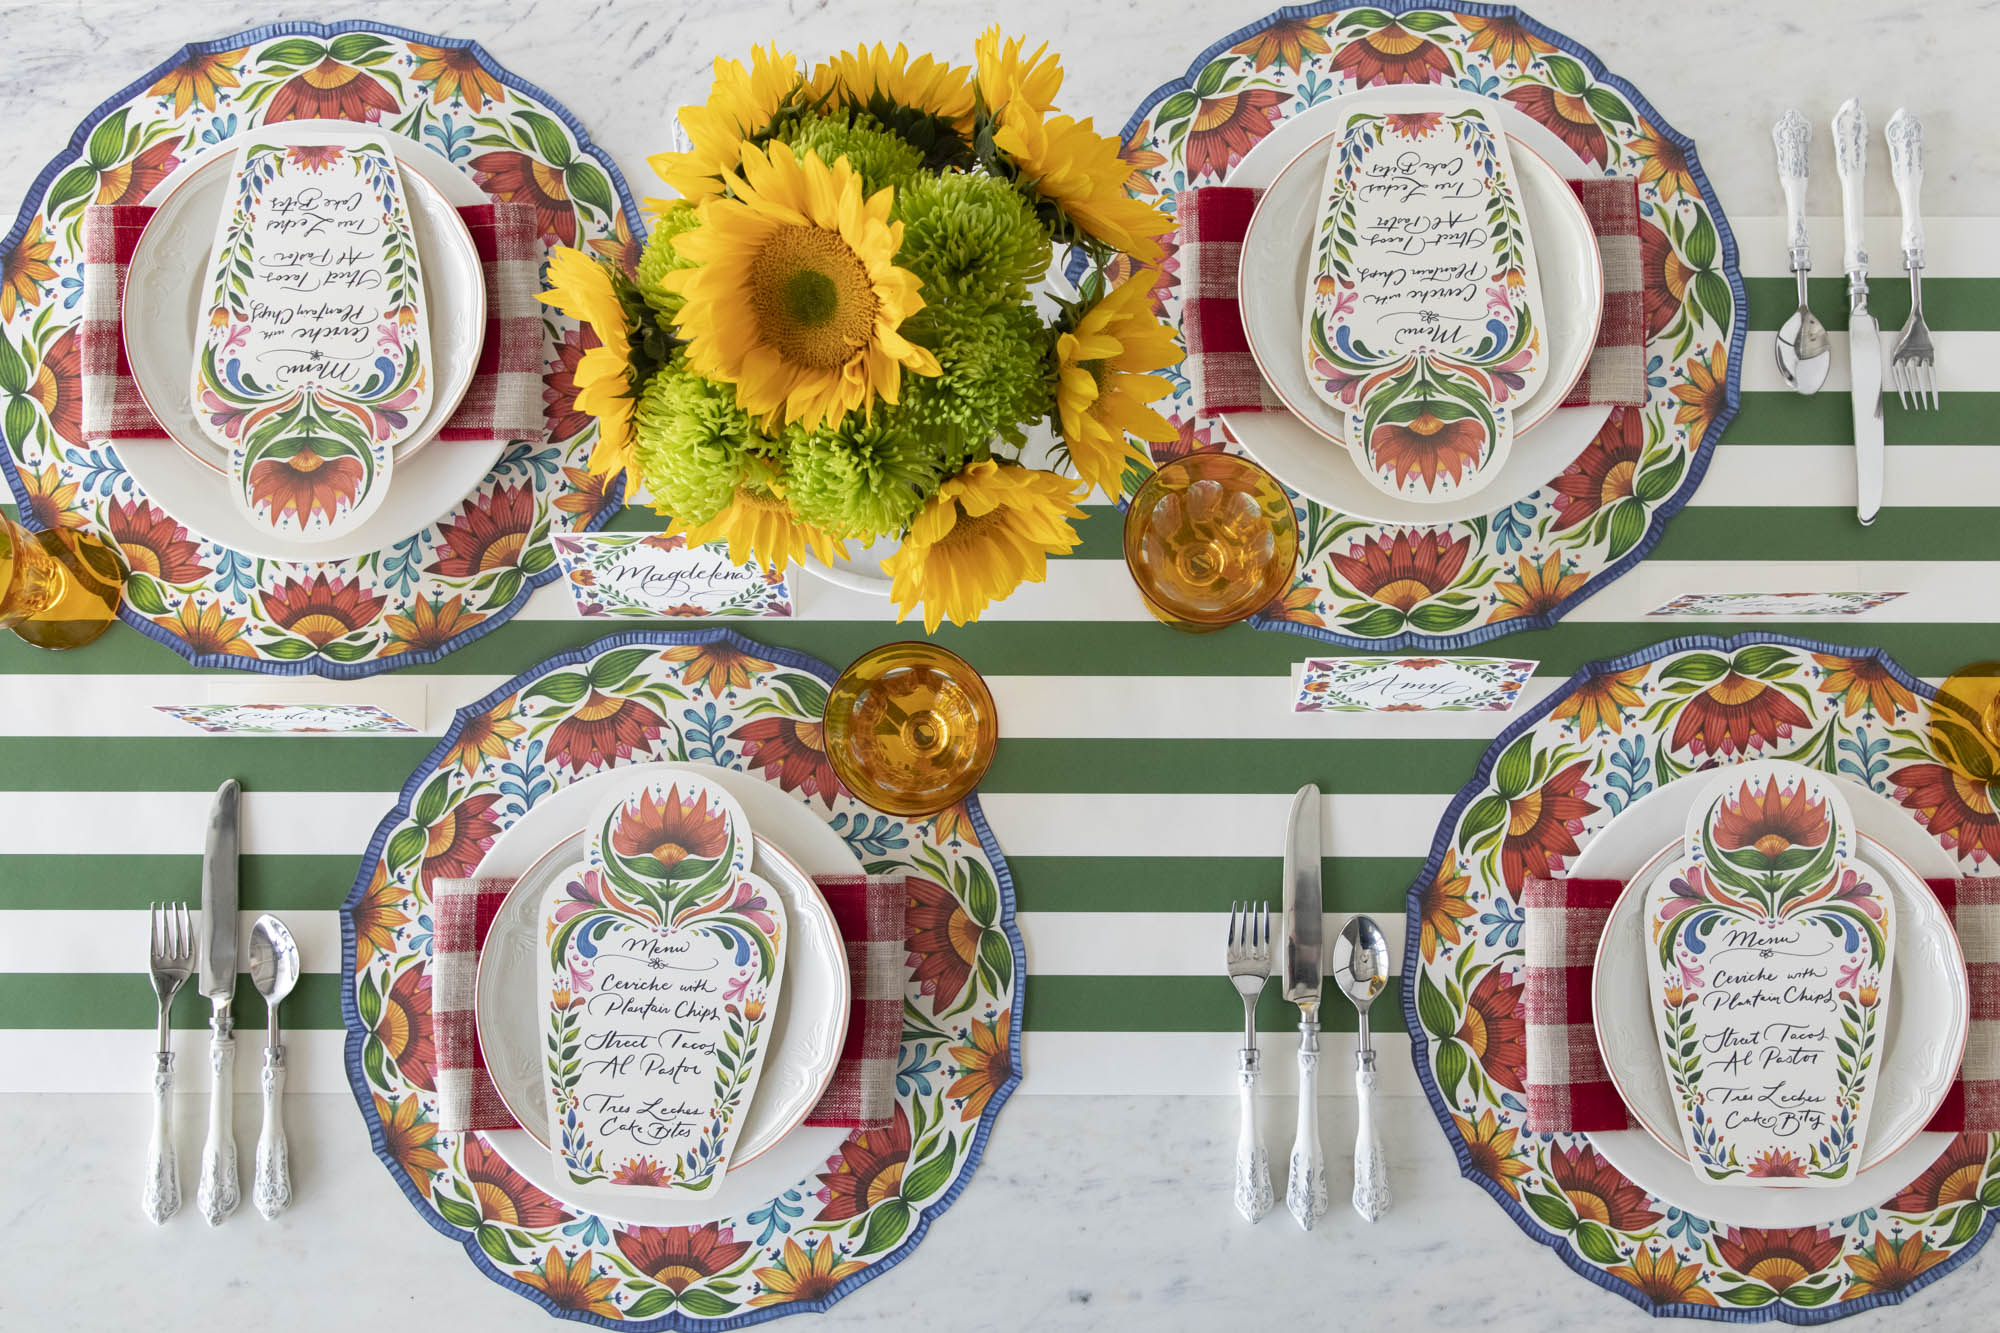 A colorful table setting with sunflowers, plates, and Die-cut Fiesta Floral Placemats from Hester &amp; Cook.